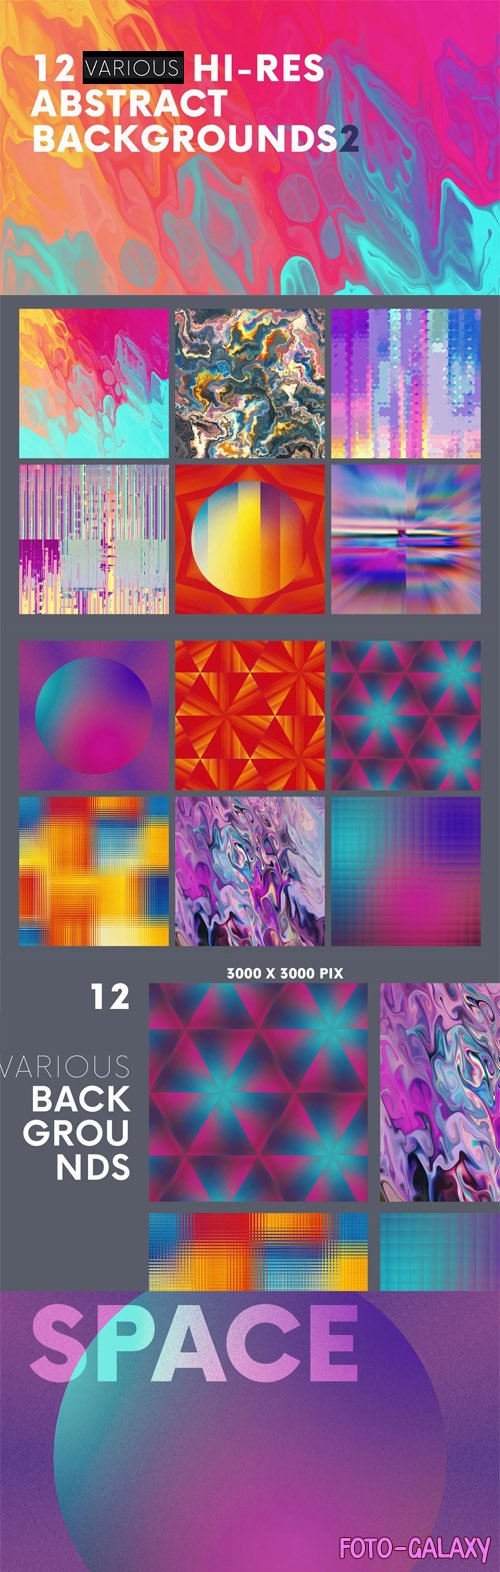 12 Hi-Res Abstract Overlays for Photoshop